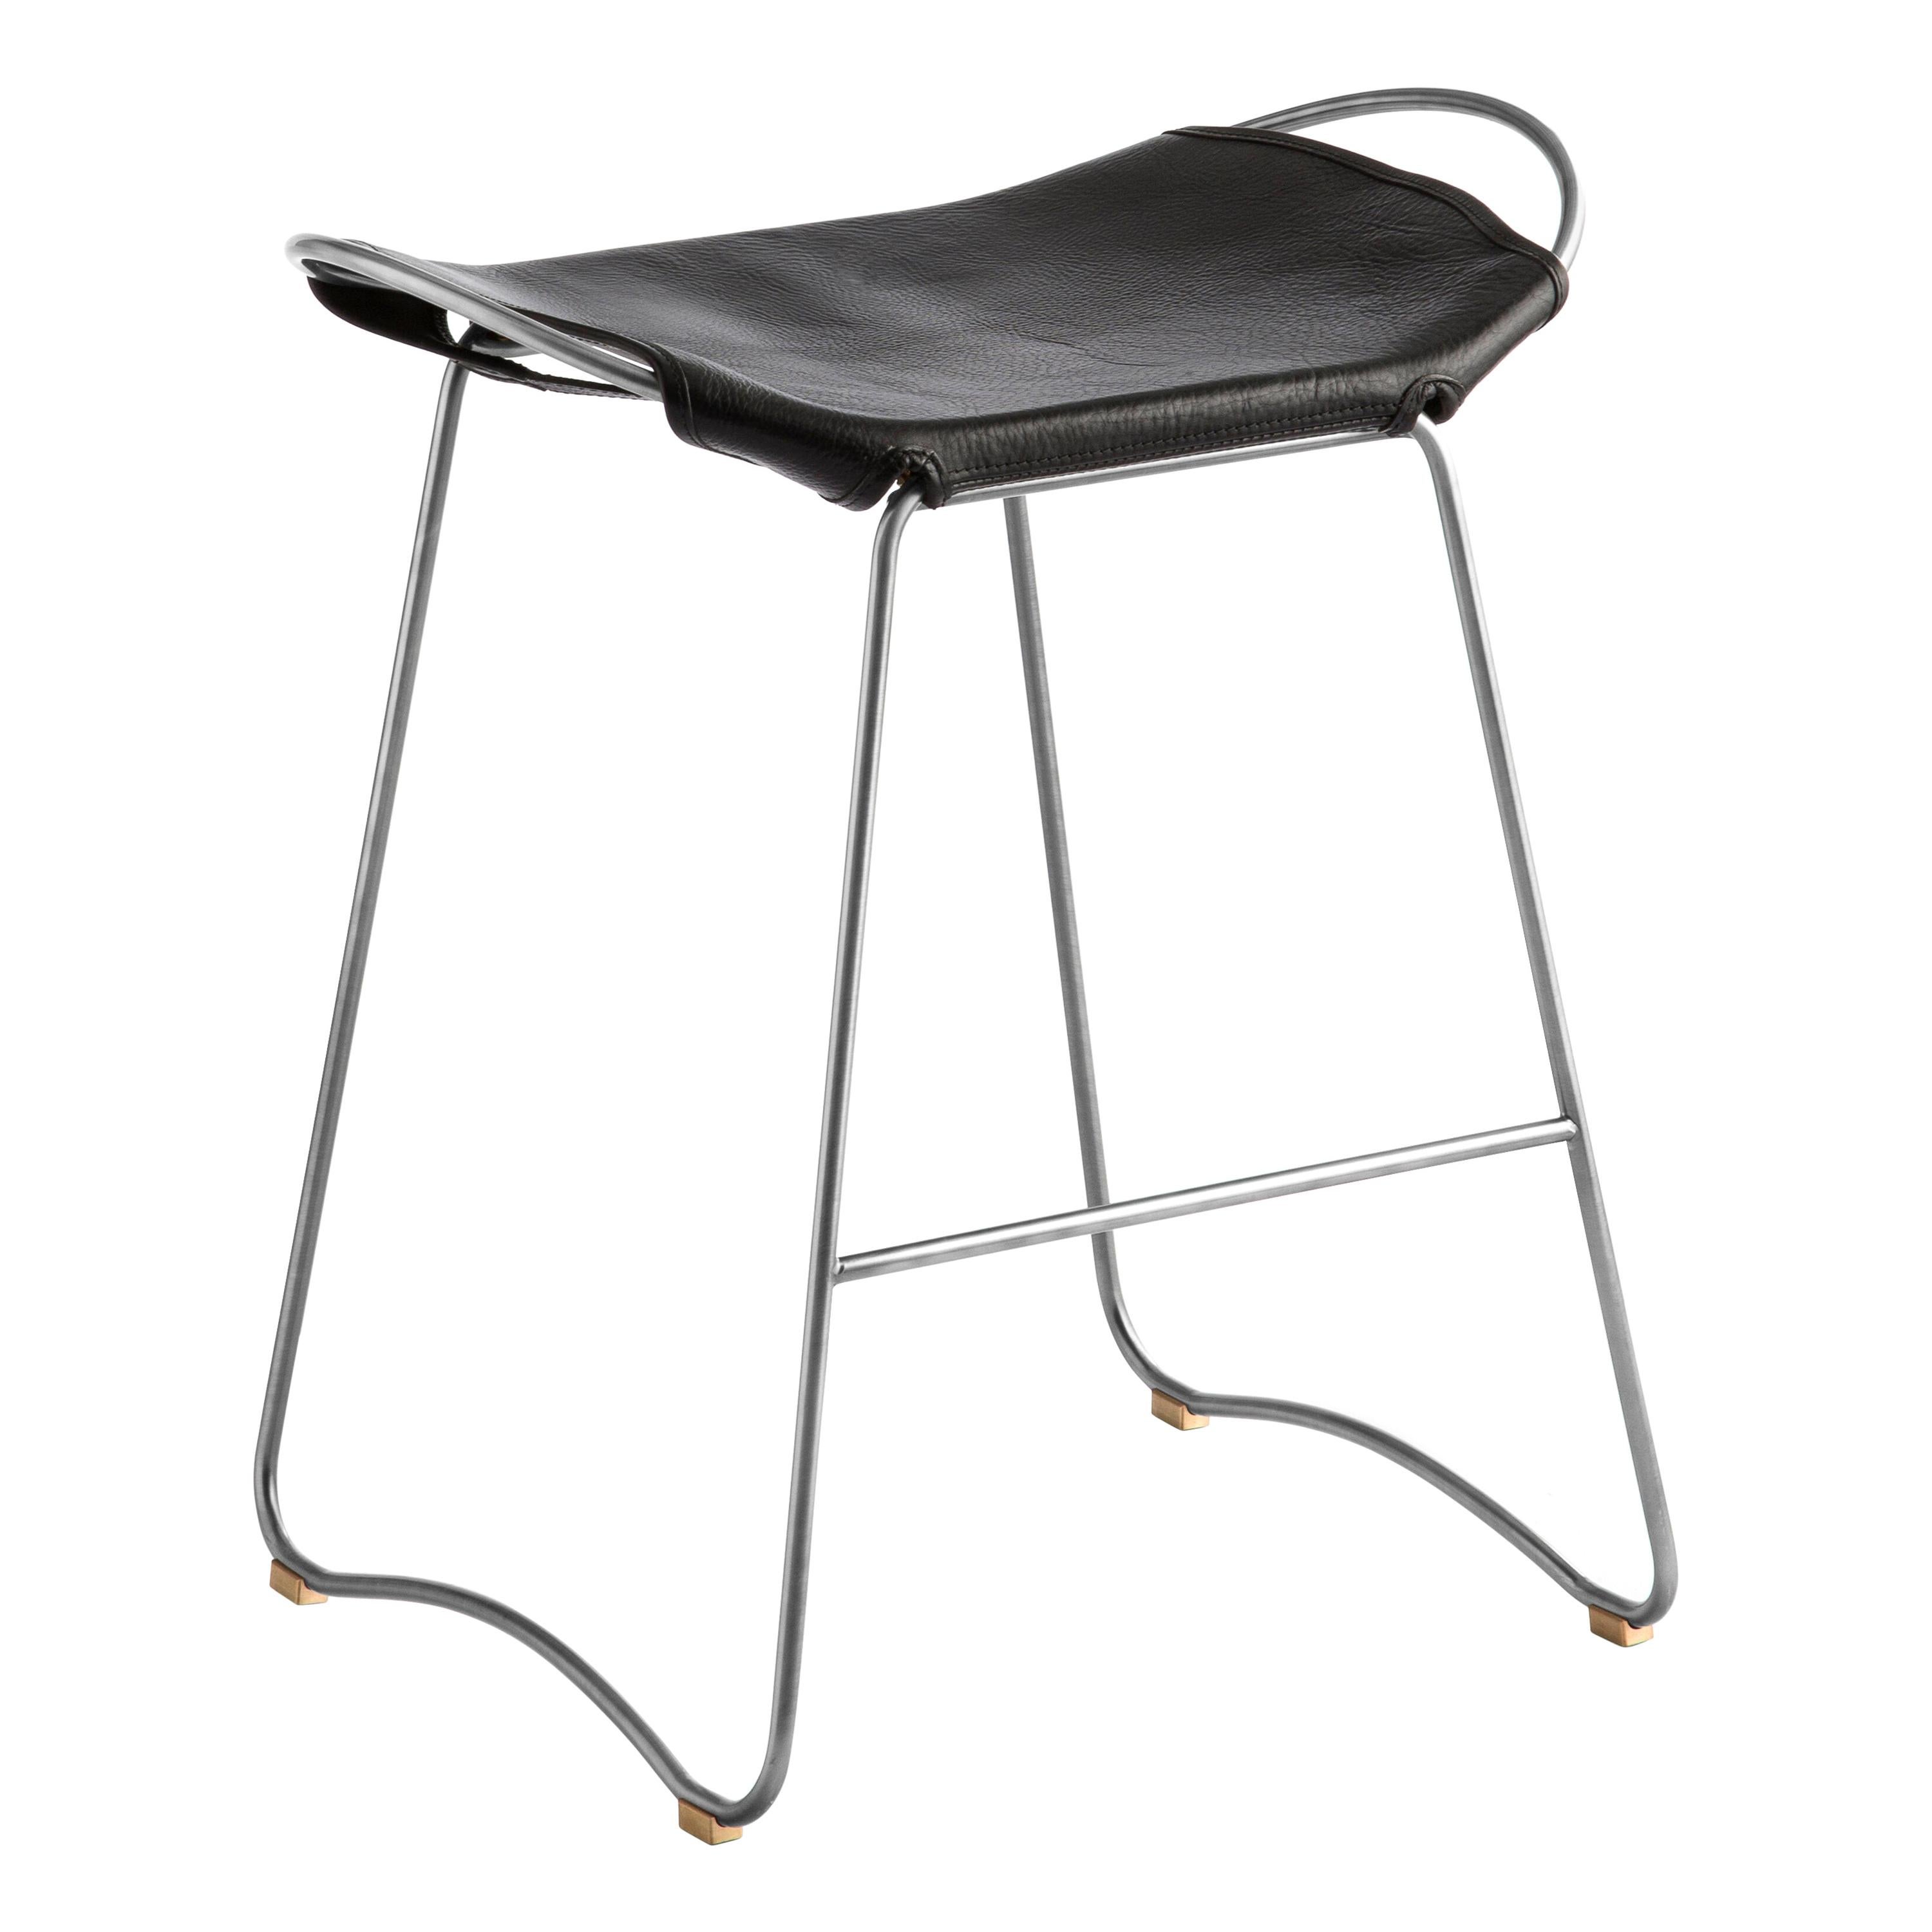 Sculptural Organic Contemporary Bar Stool Old Silver Metal & Black Leather  For Sale